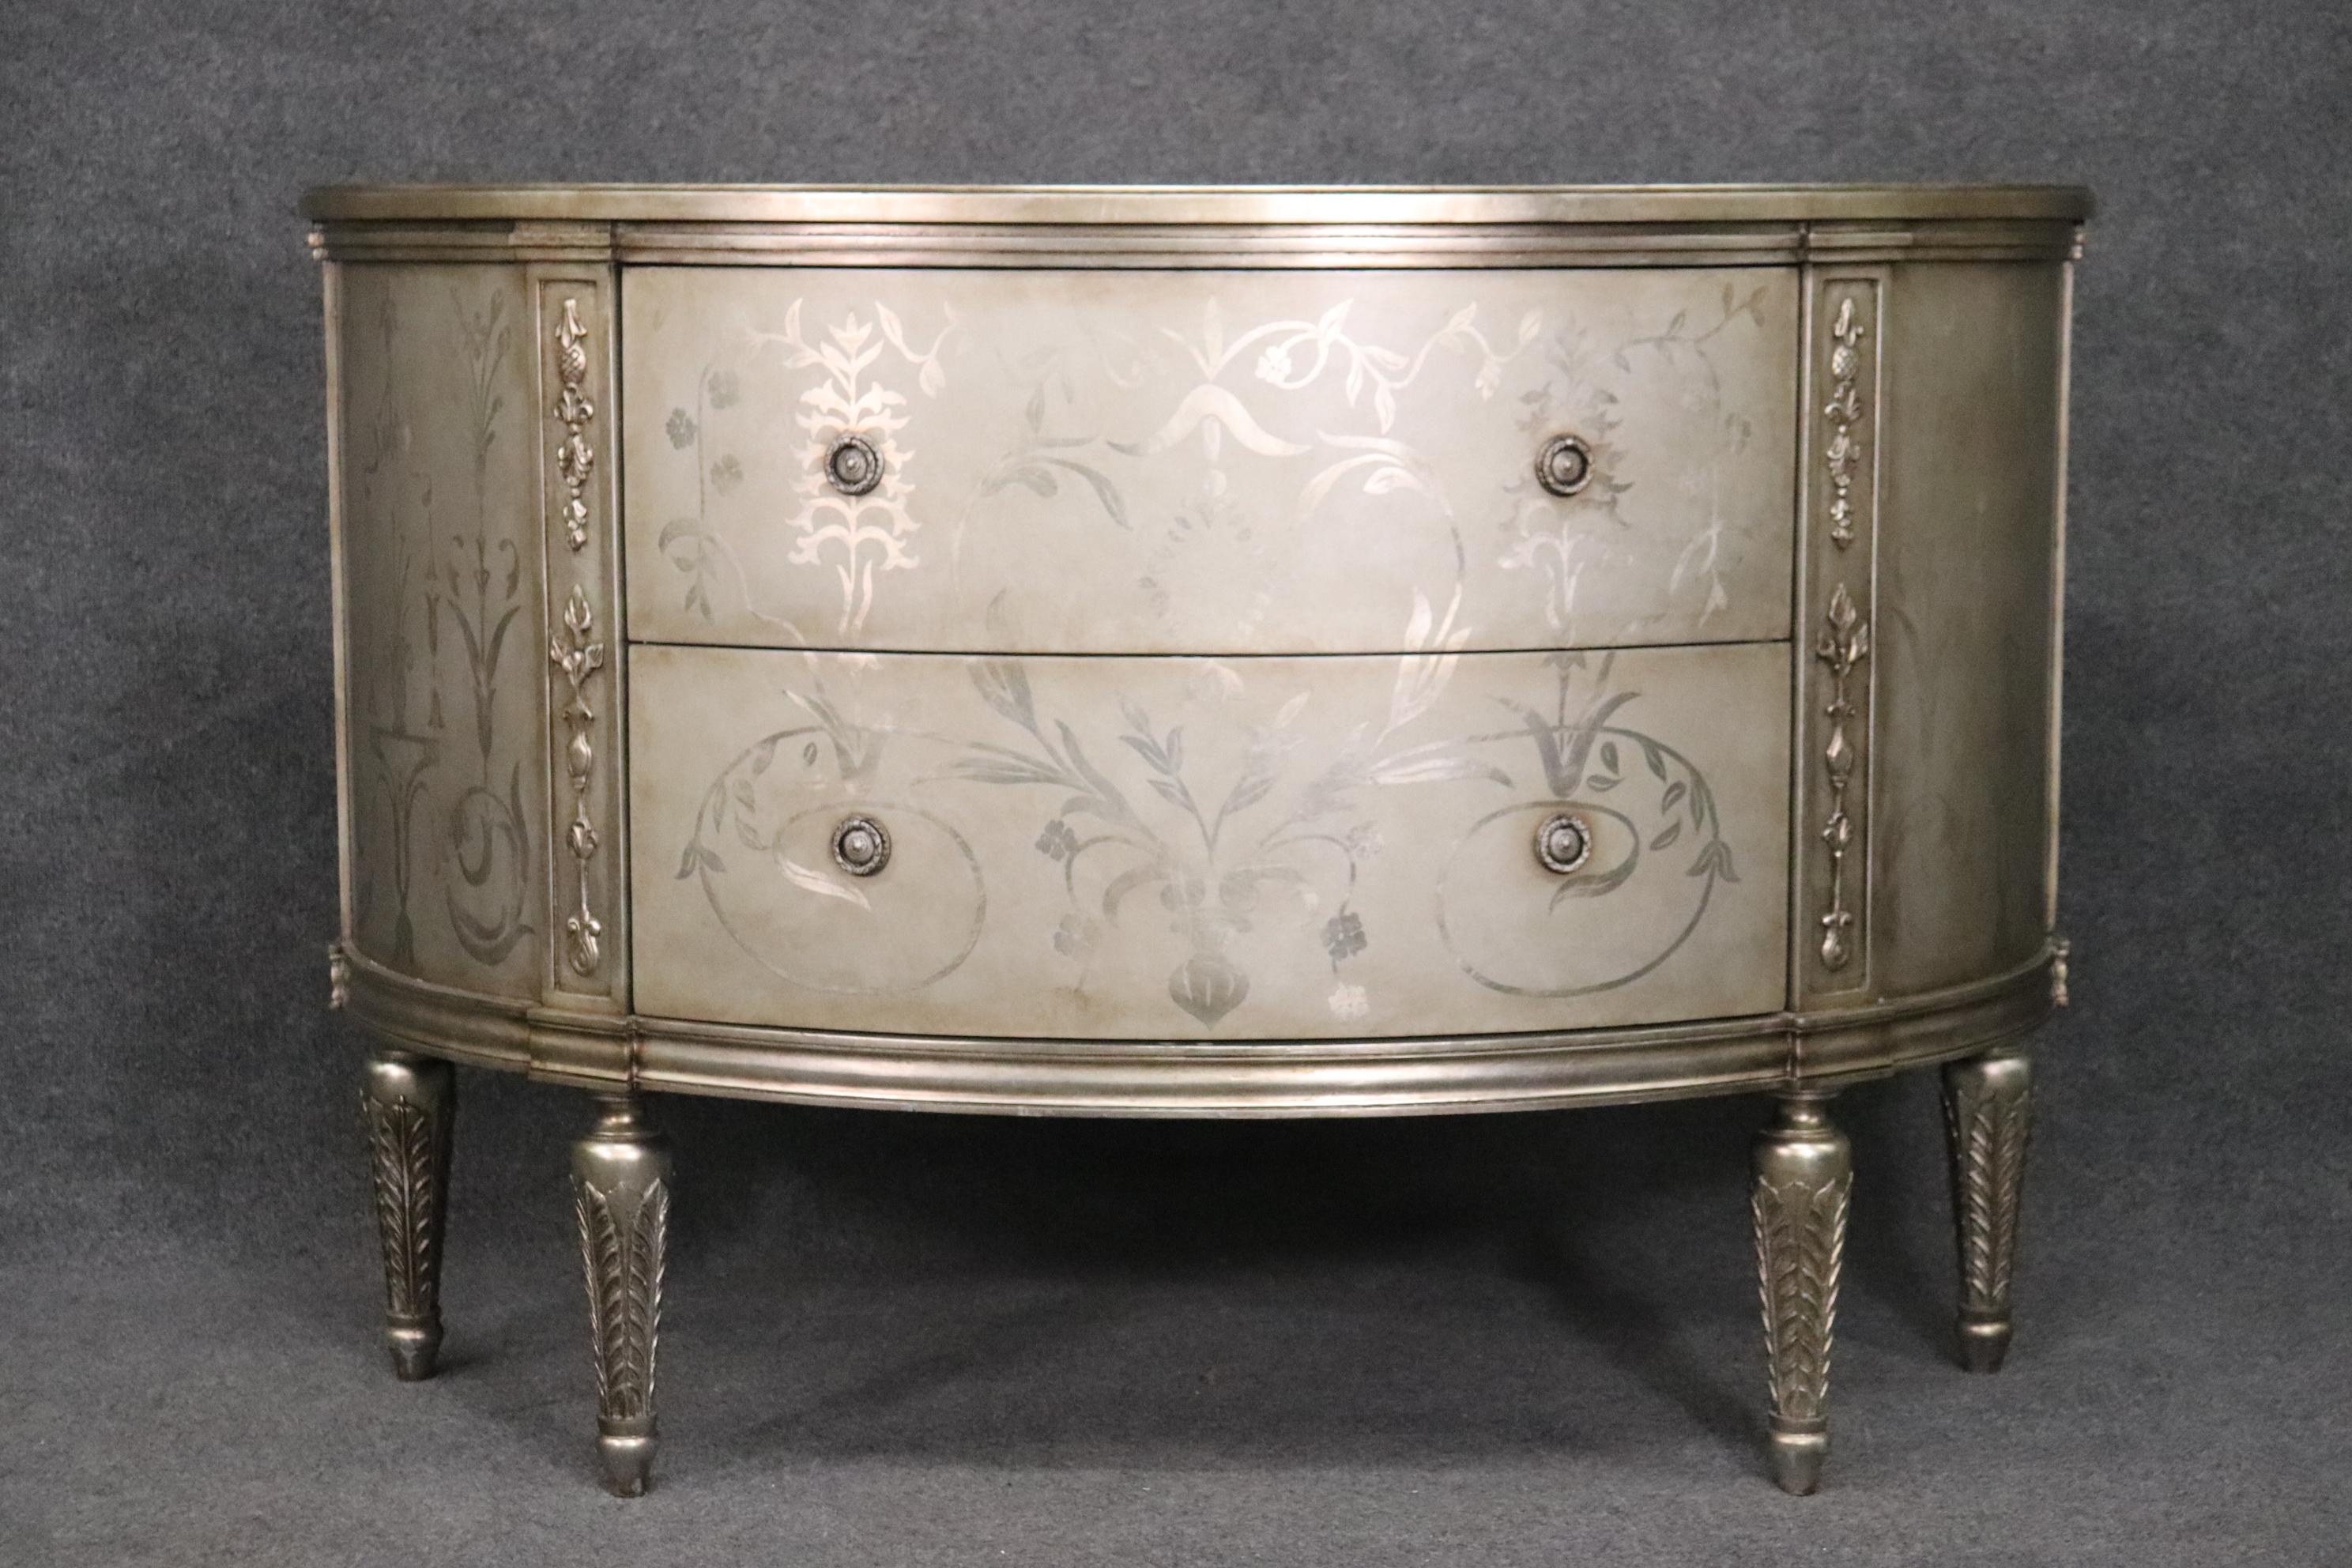 This is a beautiful Hollywood Regency style silver leaf (Not painted) commode with a nice luminous finish. The commode has some minor signs of age and use but is not very old so expect it to be in rather good shape. The commode measures 23 deep x 56